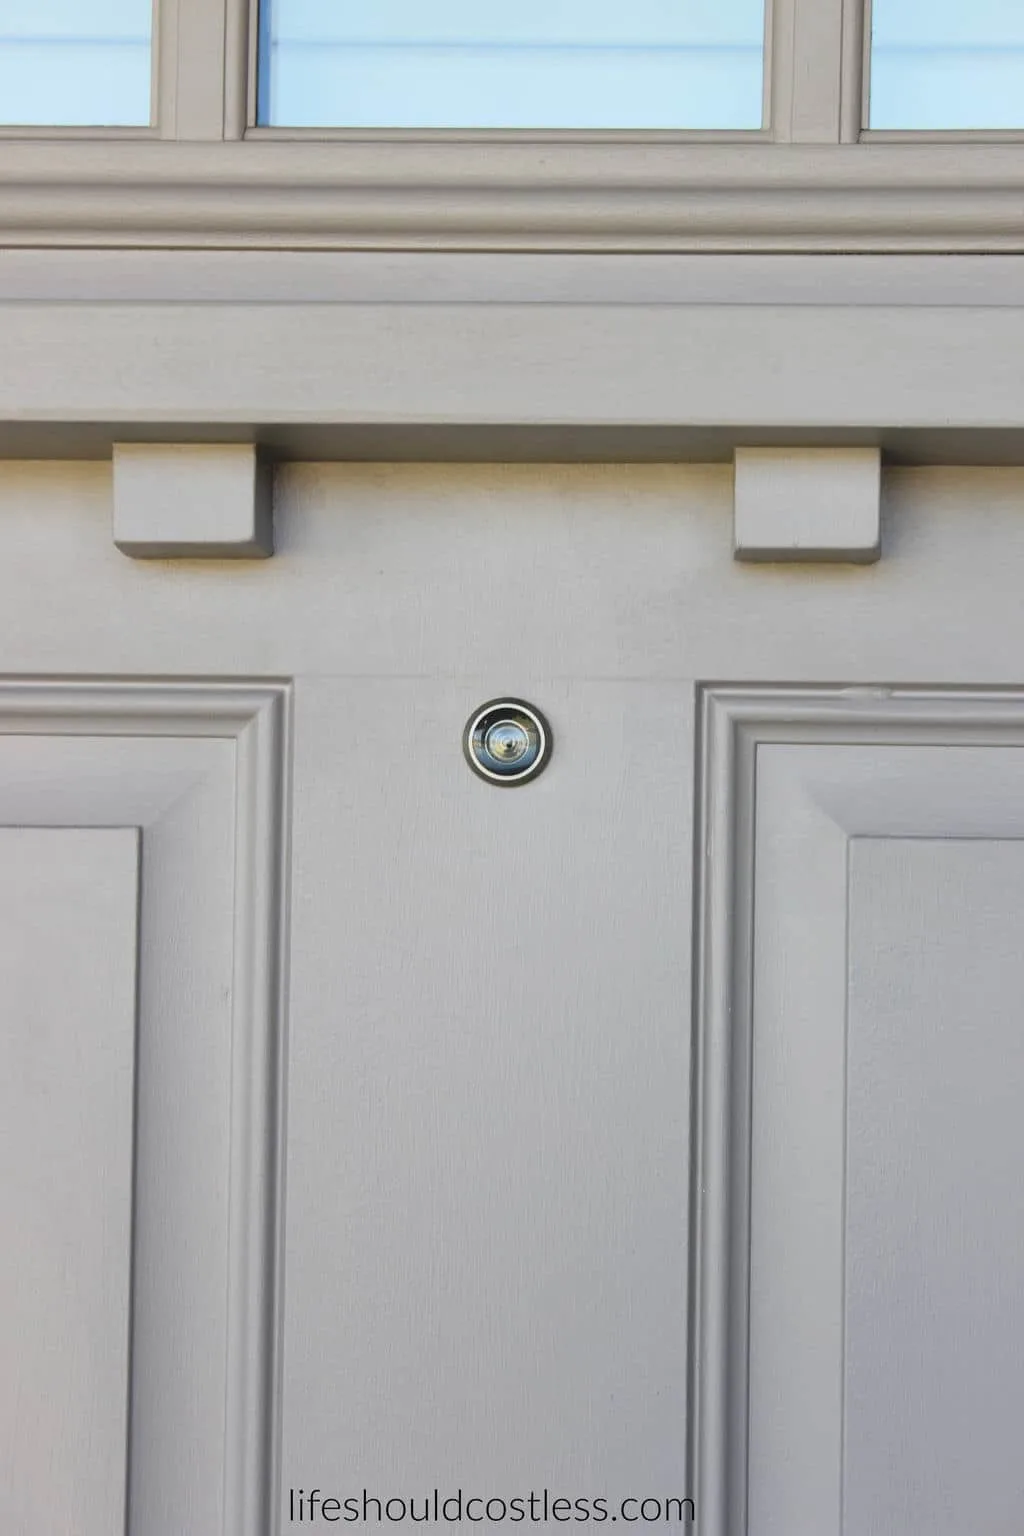 DIY How to install a peep hole in your front door. After